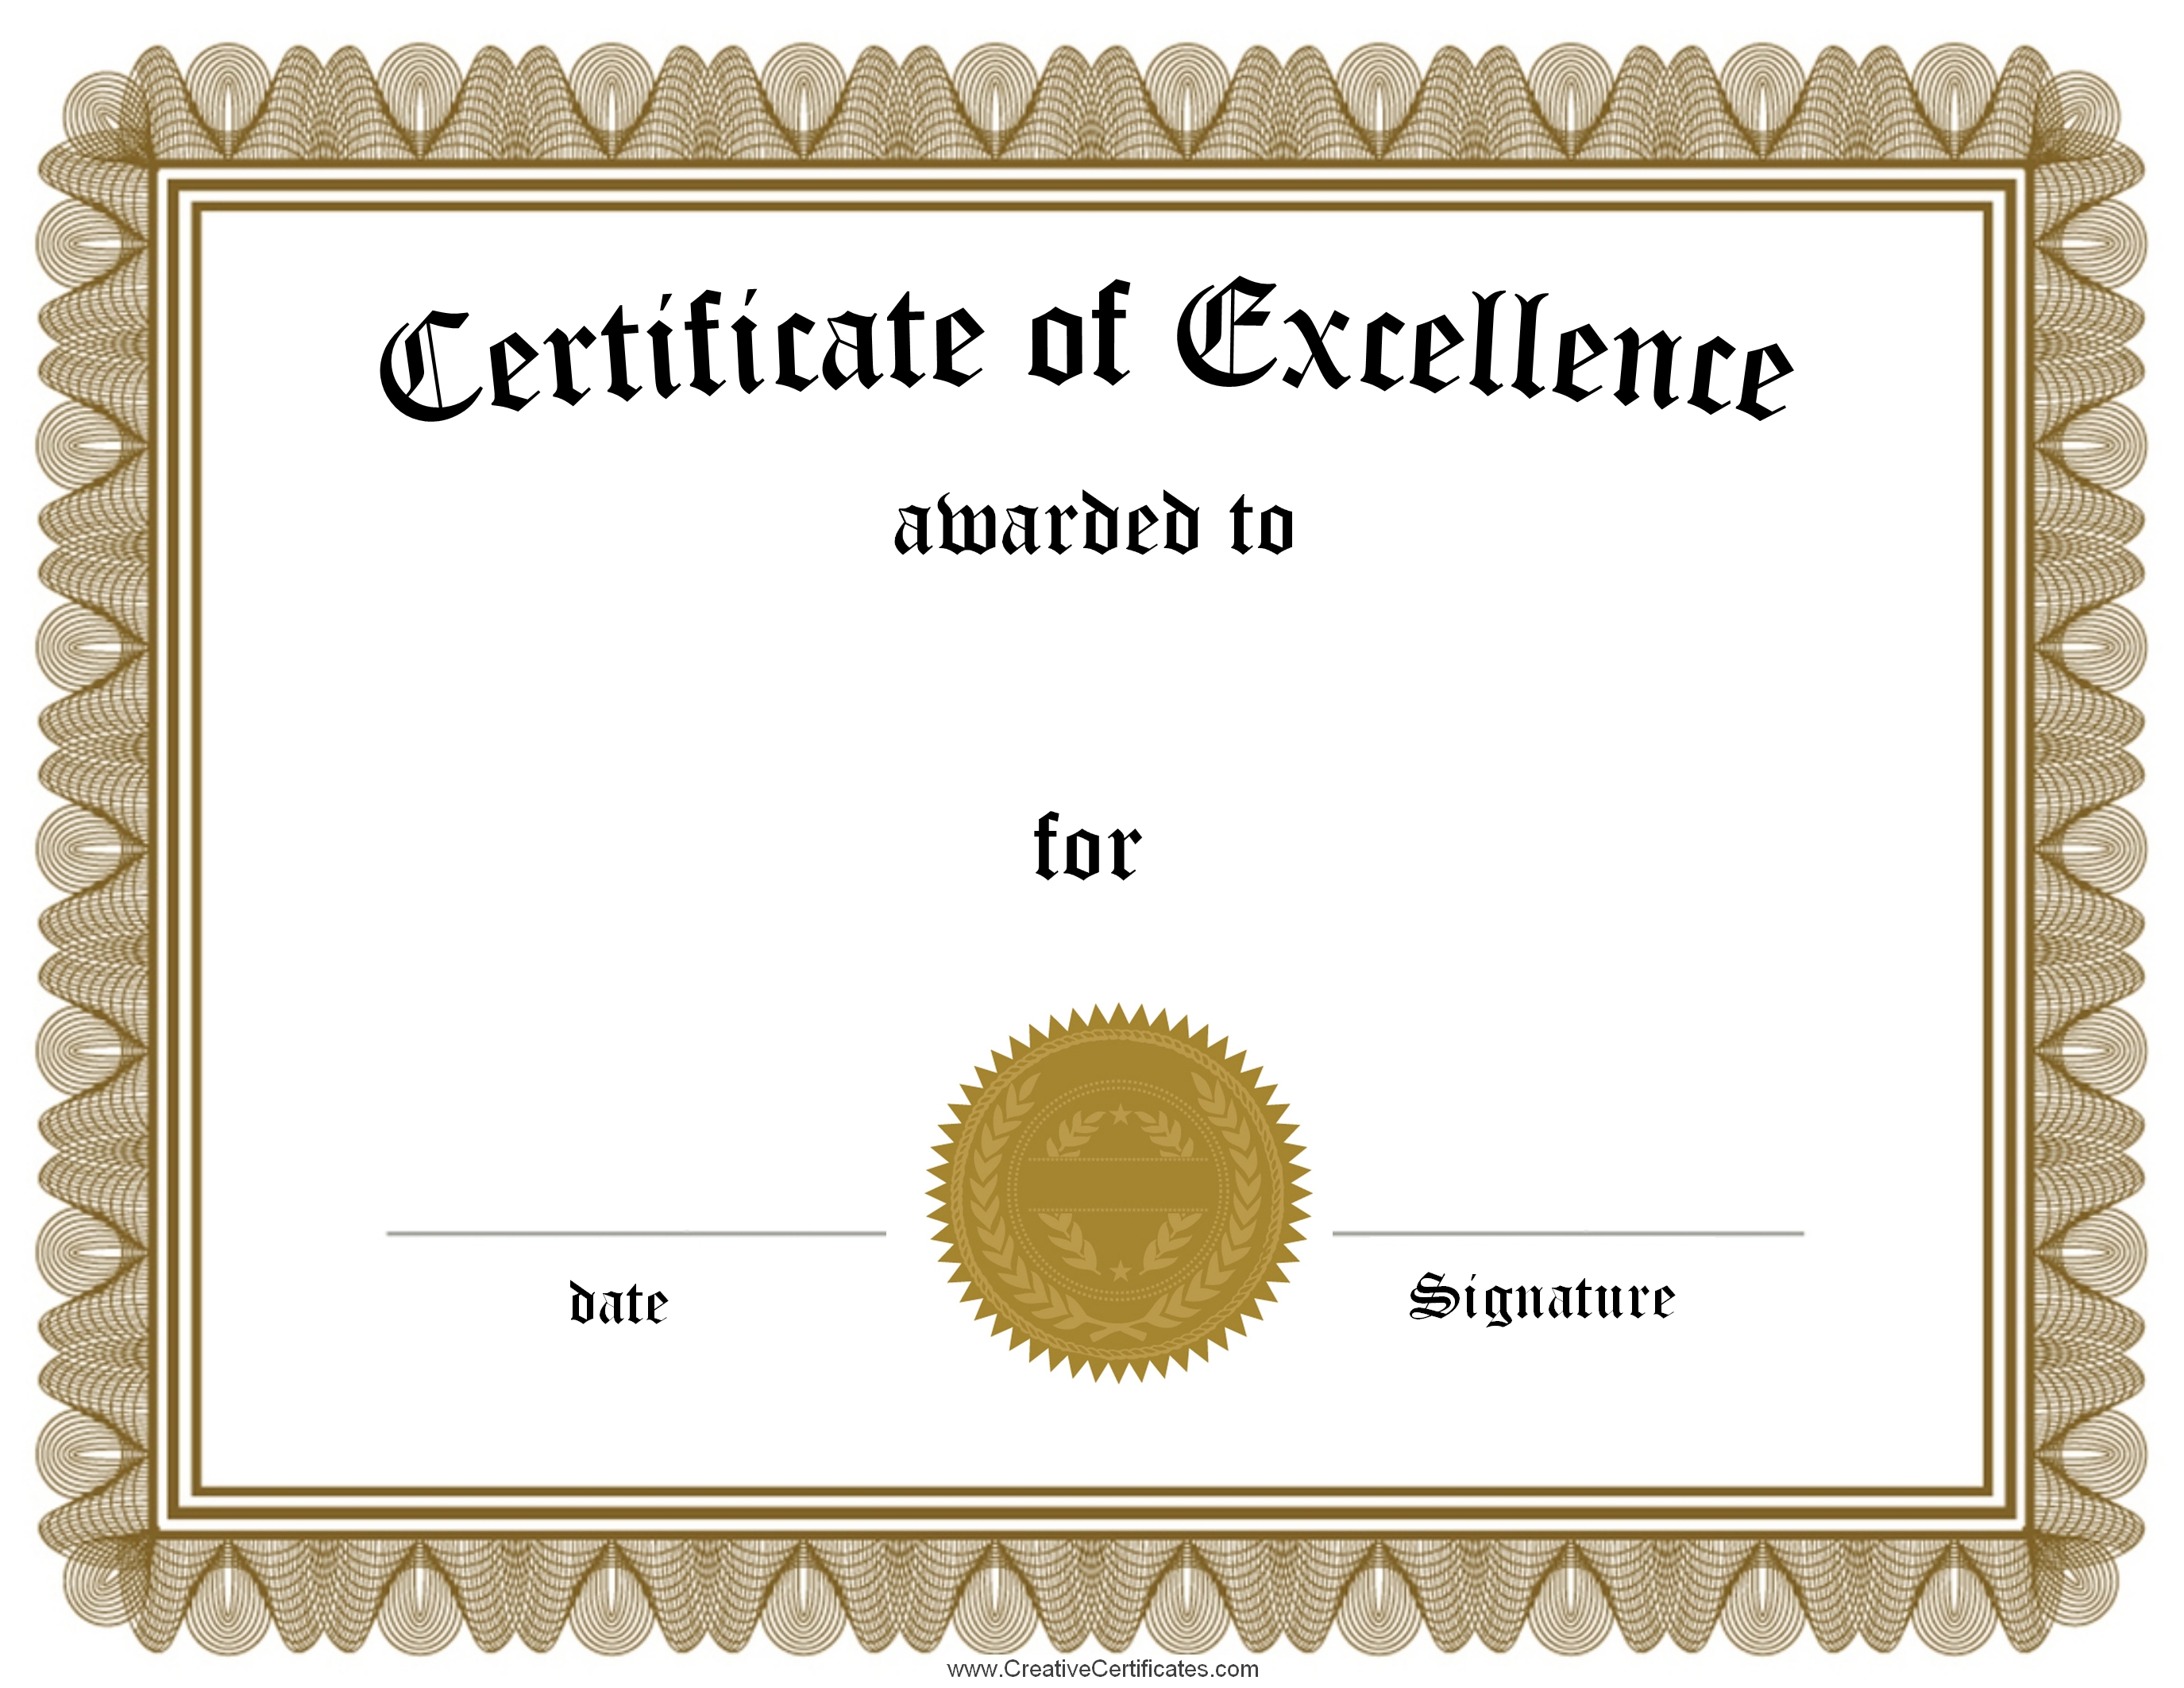 Certificate of excellence WinTech